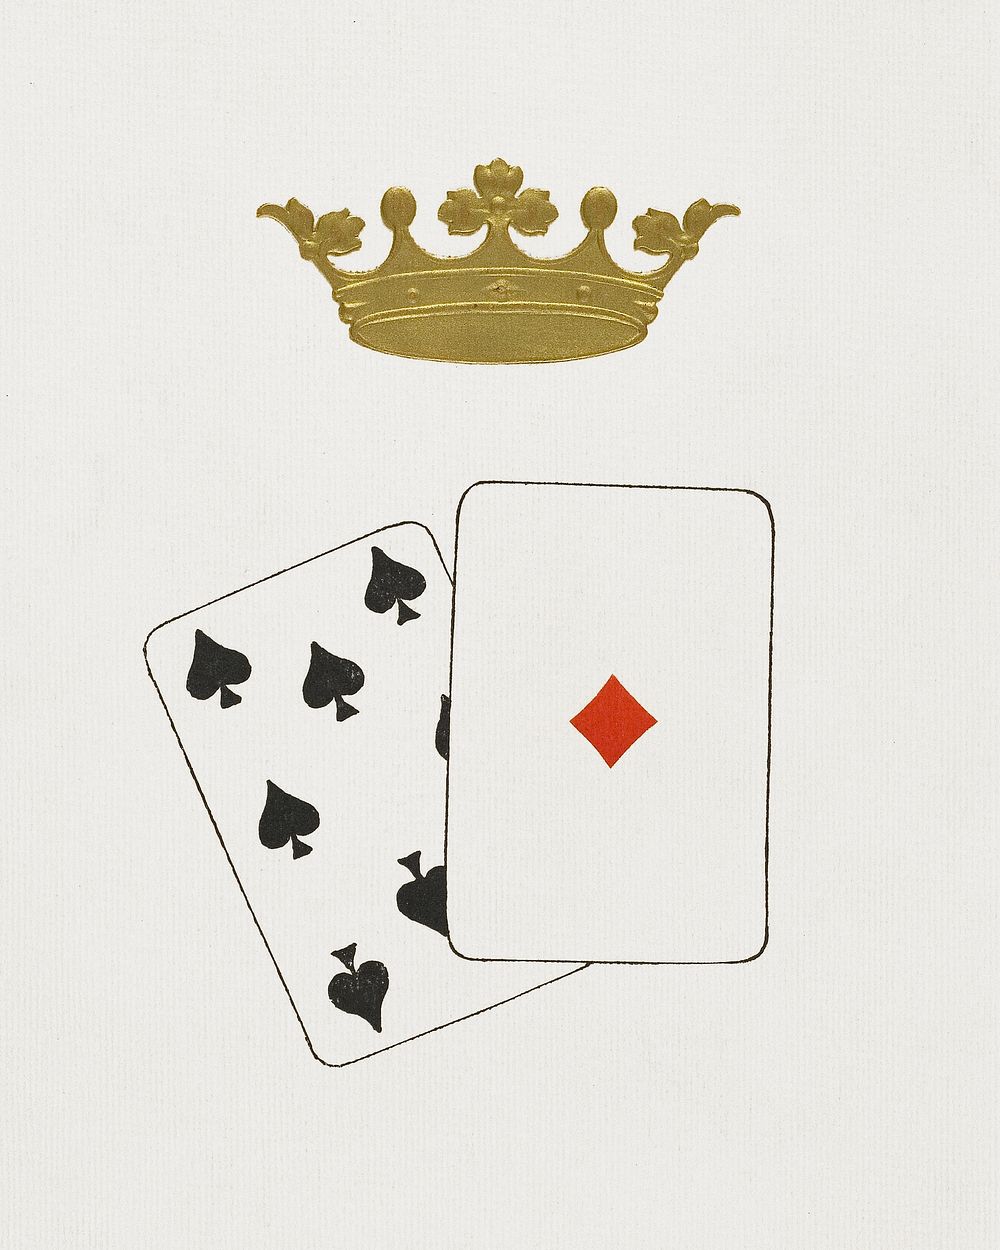 Play cards (1912), vintage illustration. Original public domain image from Carnavalet Museum. Digitally enhanced by rawpixel.